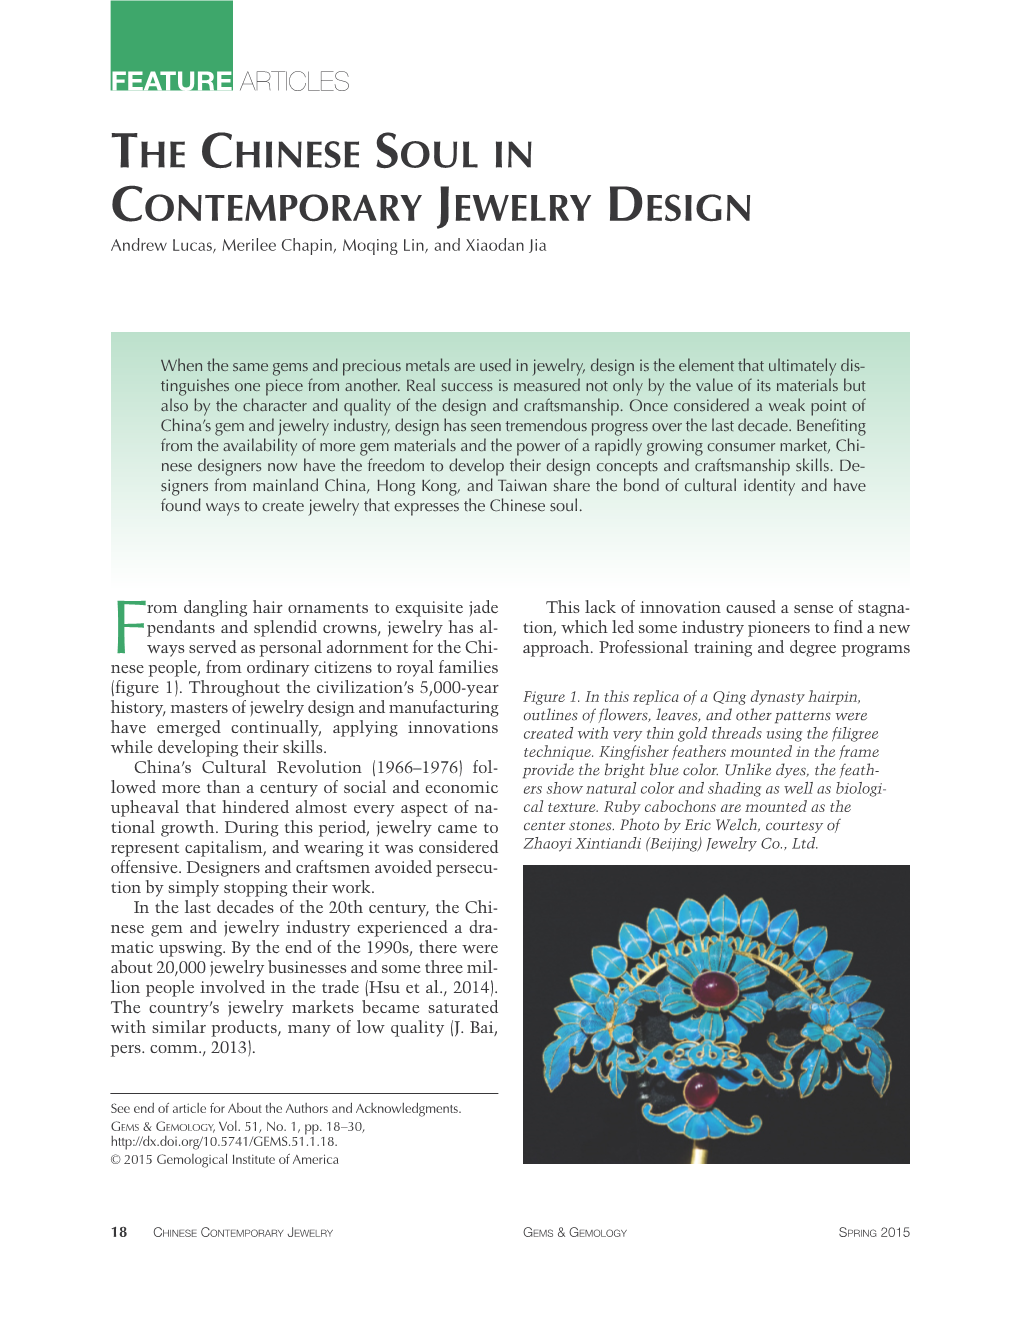 THE CHINESE SOUL in CONTEMPORARY JEWELRY DESIGN Andrew Lucas, Merilee Chapin, Moqing Lin, and Xiaodan Jia